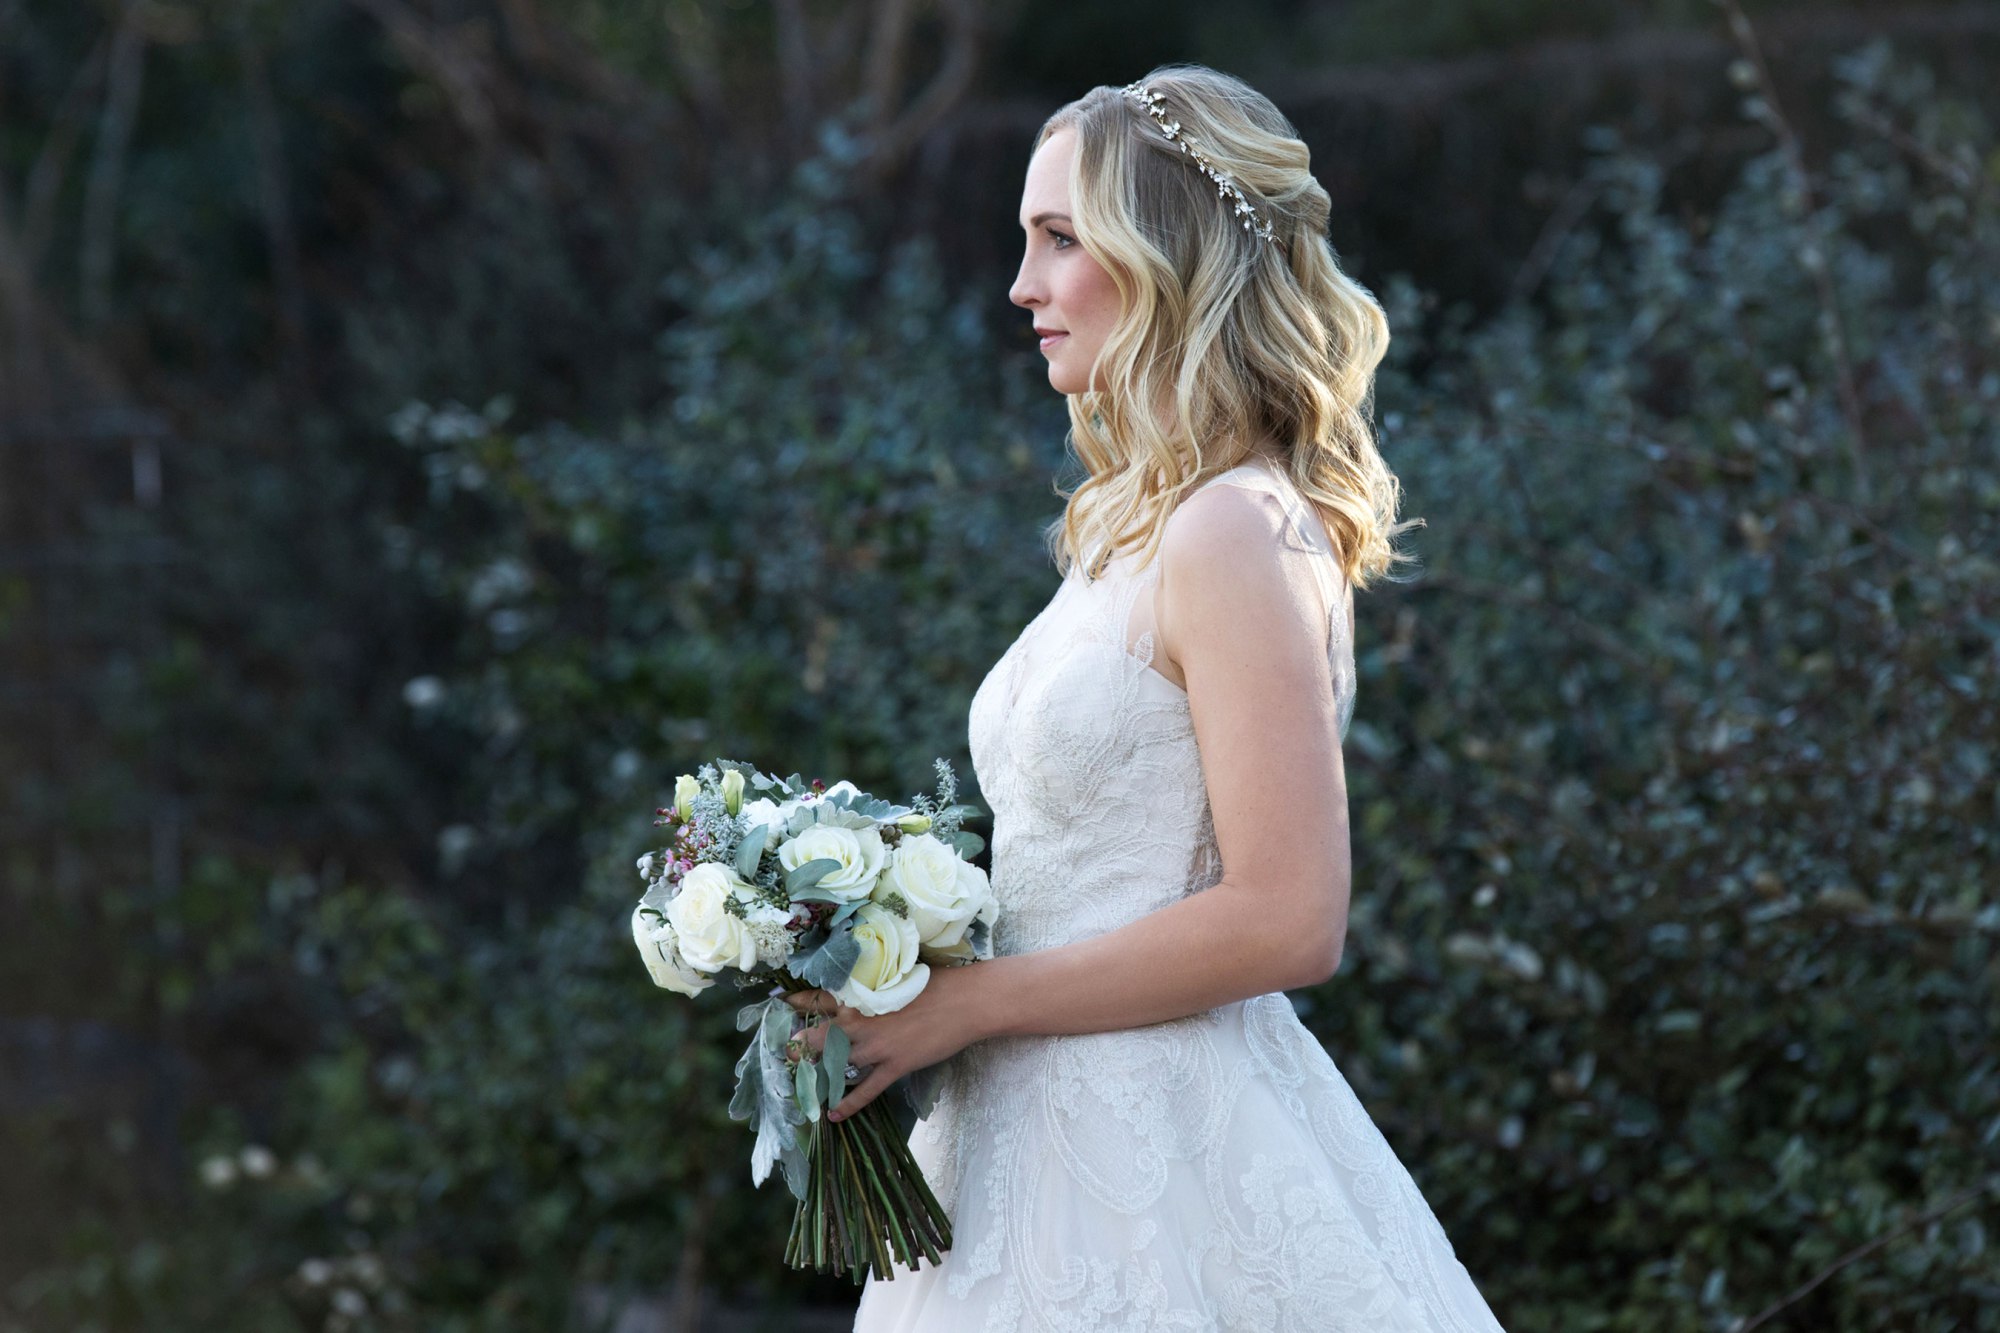 The Vampire Diaries -- "We're Planning a June Wedding" -- Image Number: VD815c_0233.jpg -- Pictured: Candice King as Caroline -- Photo: Bob Mahoney/The CW -- ÃÂ© 2017 The CW Network, LLC. All Rights Reserved.